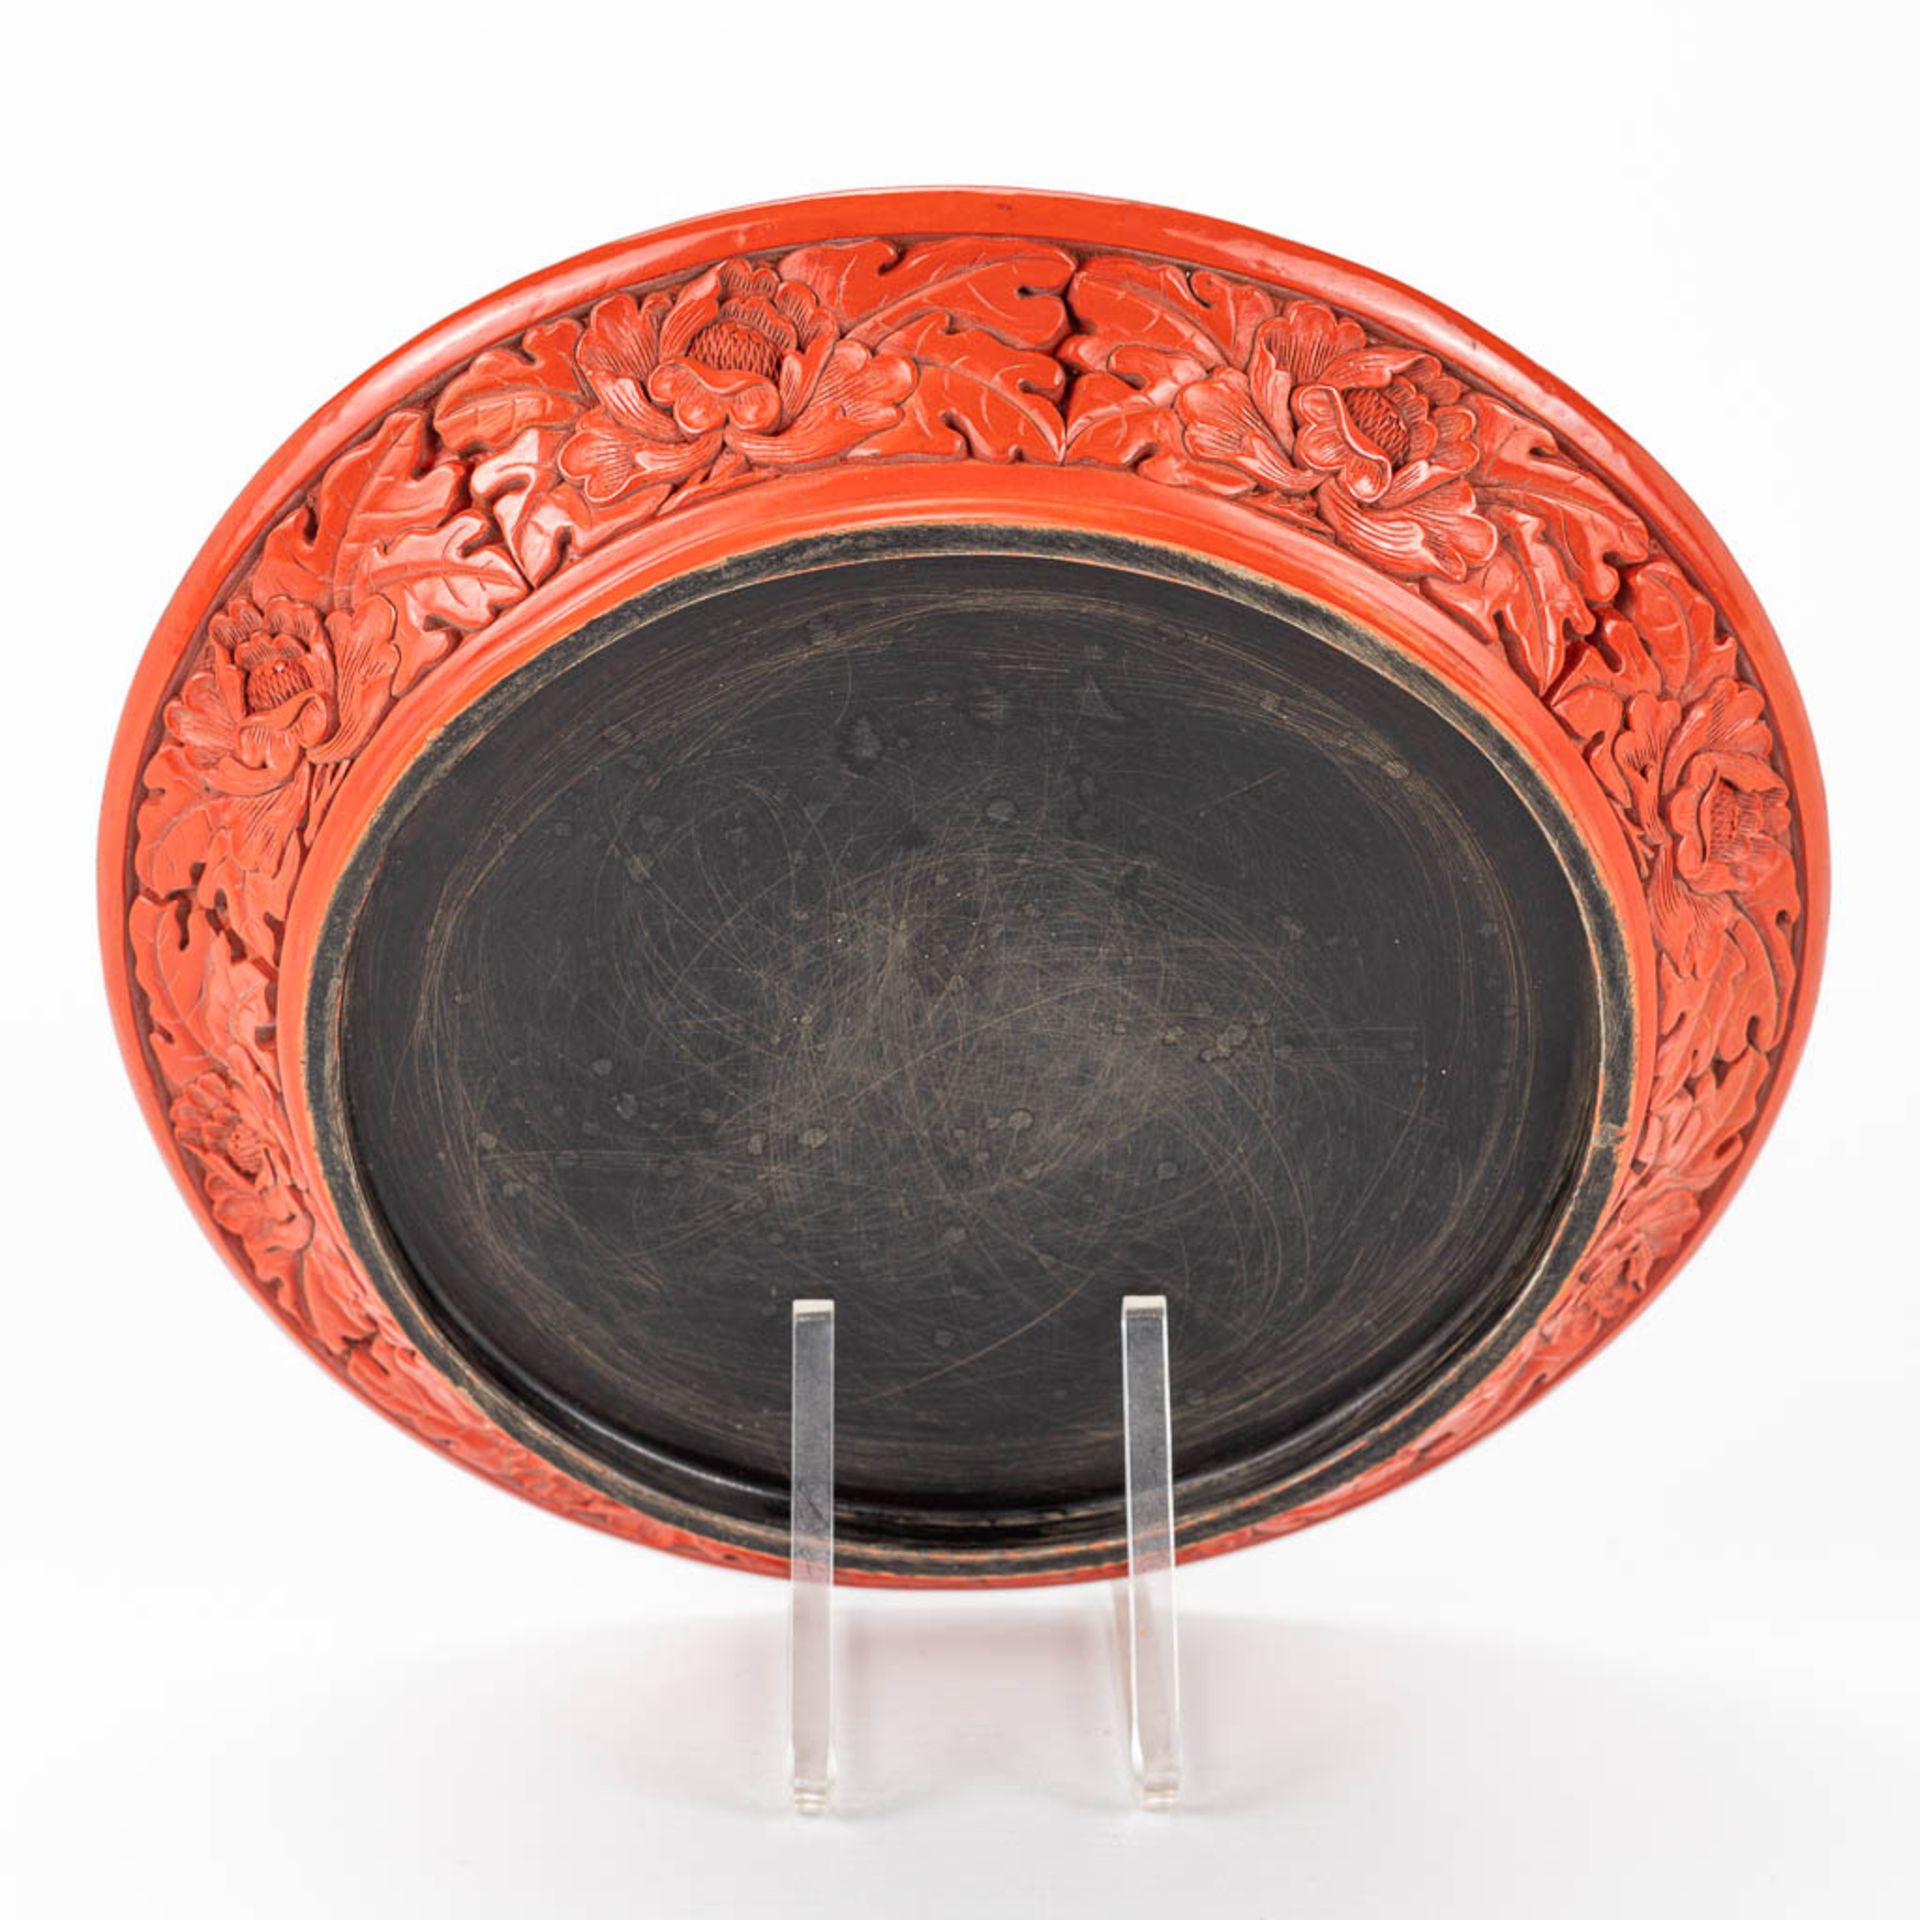 A plate made of lacquered cinnabar and made in China. - Image 8 of 10